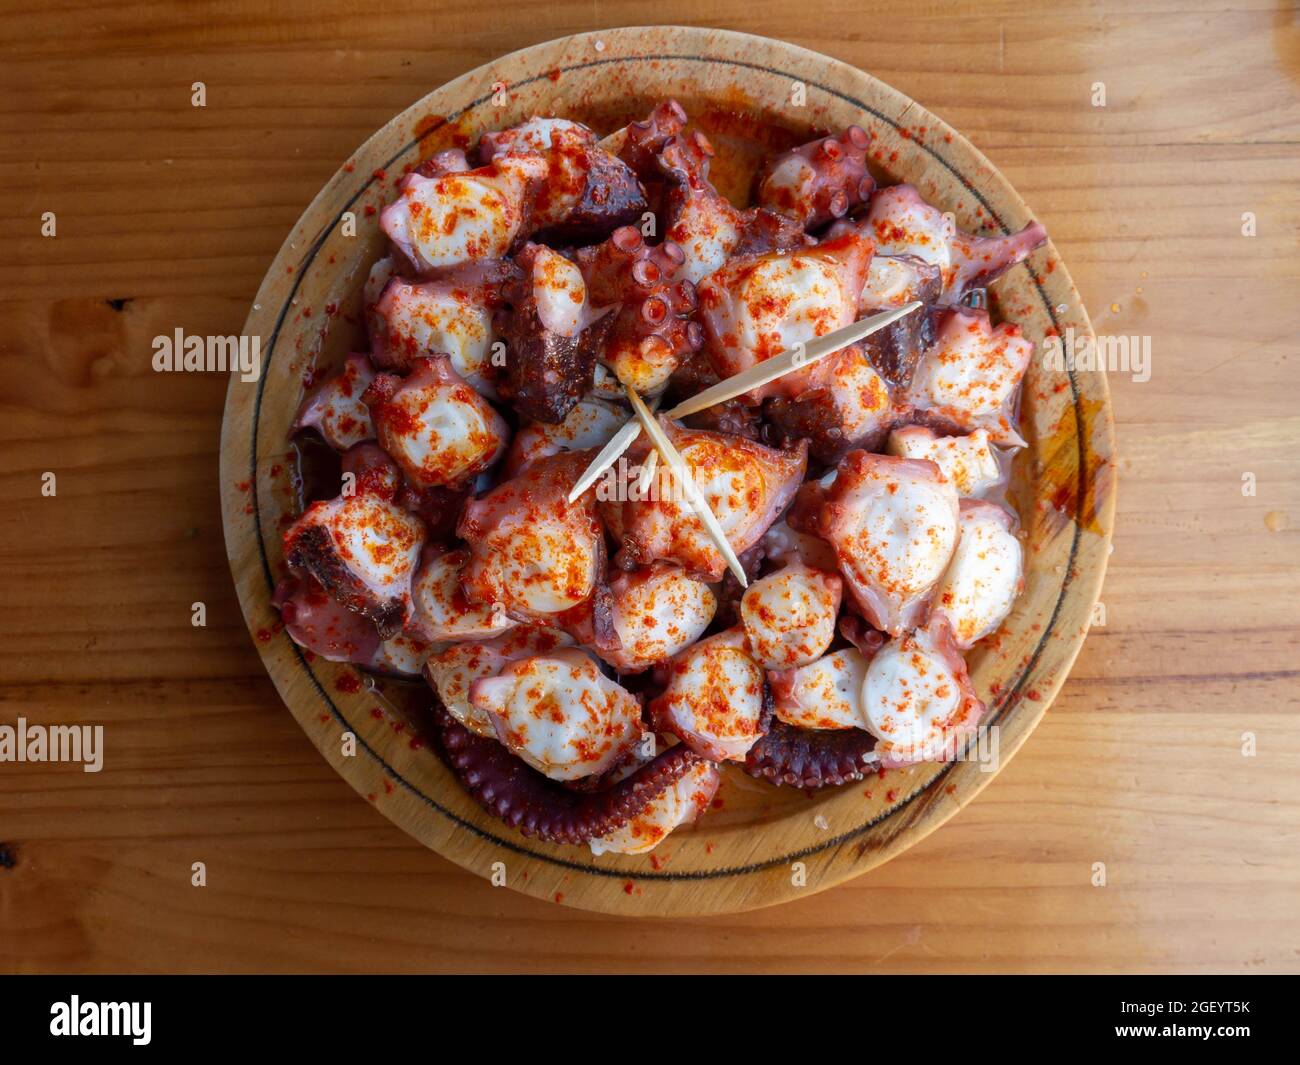 Polbo a feira meaning fair-style octopus in gallego or pulpo a la gallega in Spanish meaning Galician-style octopus a traditional Galician dish top vi Stock Photo